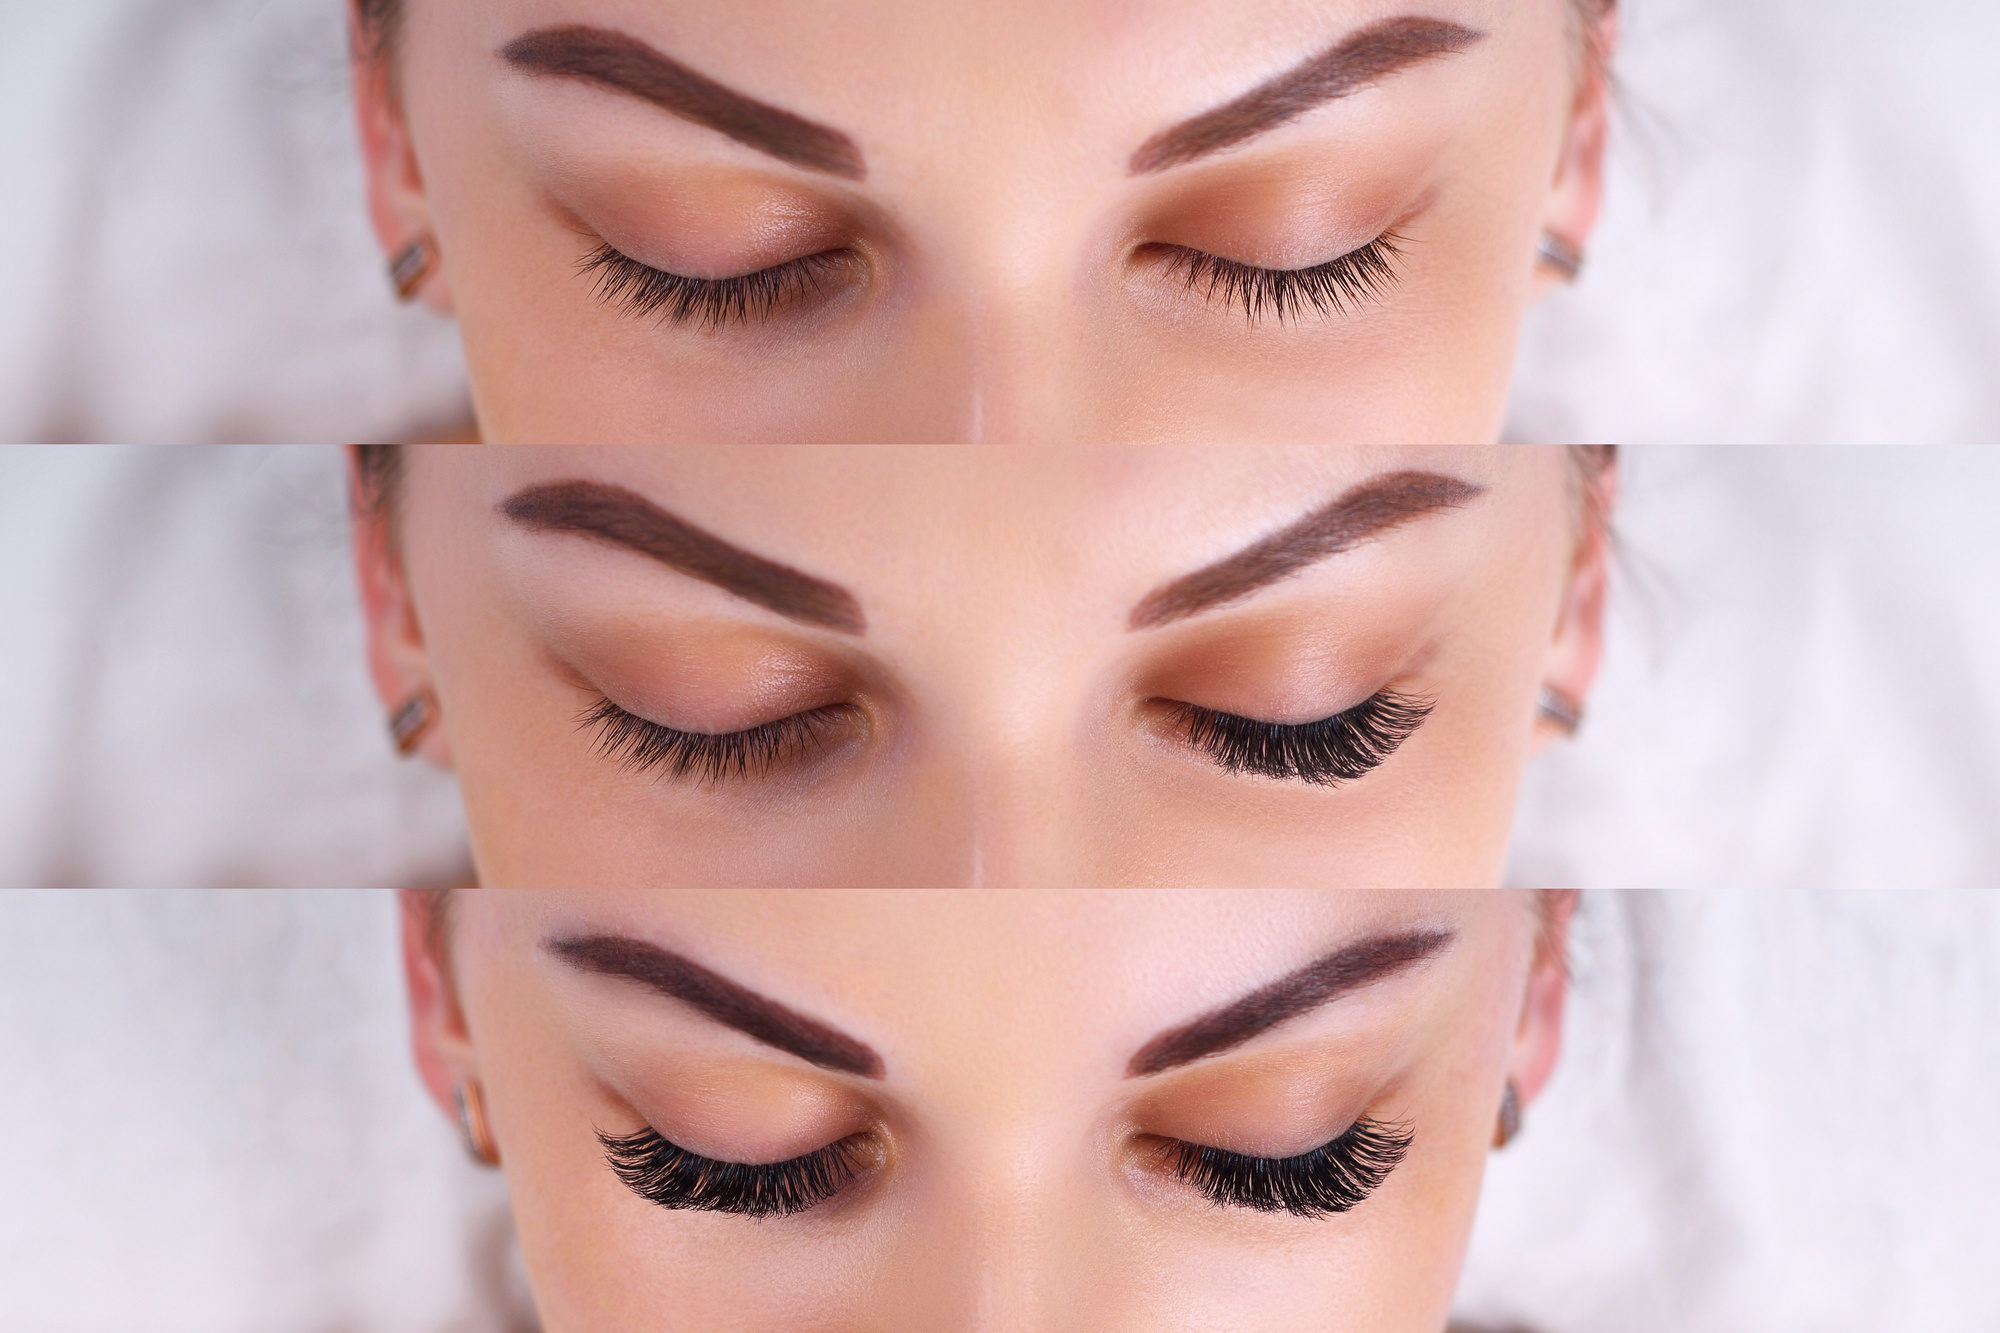 Microblading vs Permanent Makeup: What's Difference? - DFW of and Temecula